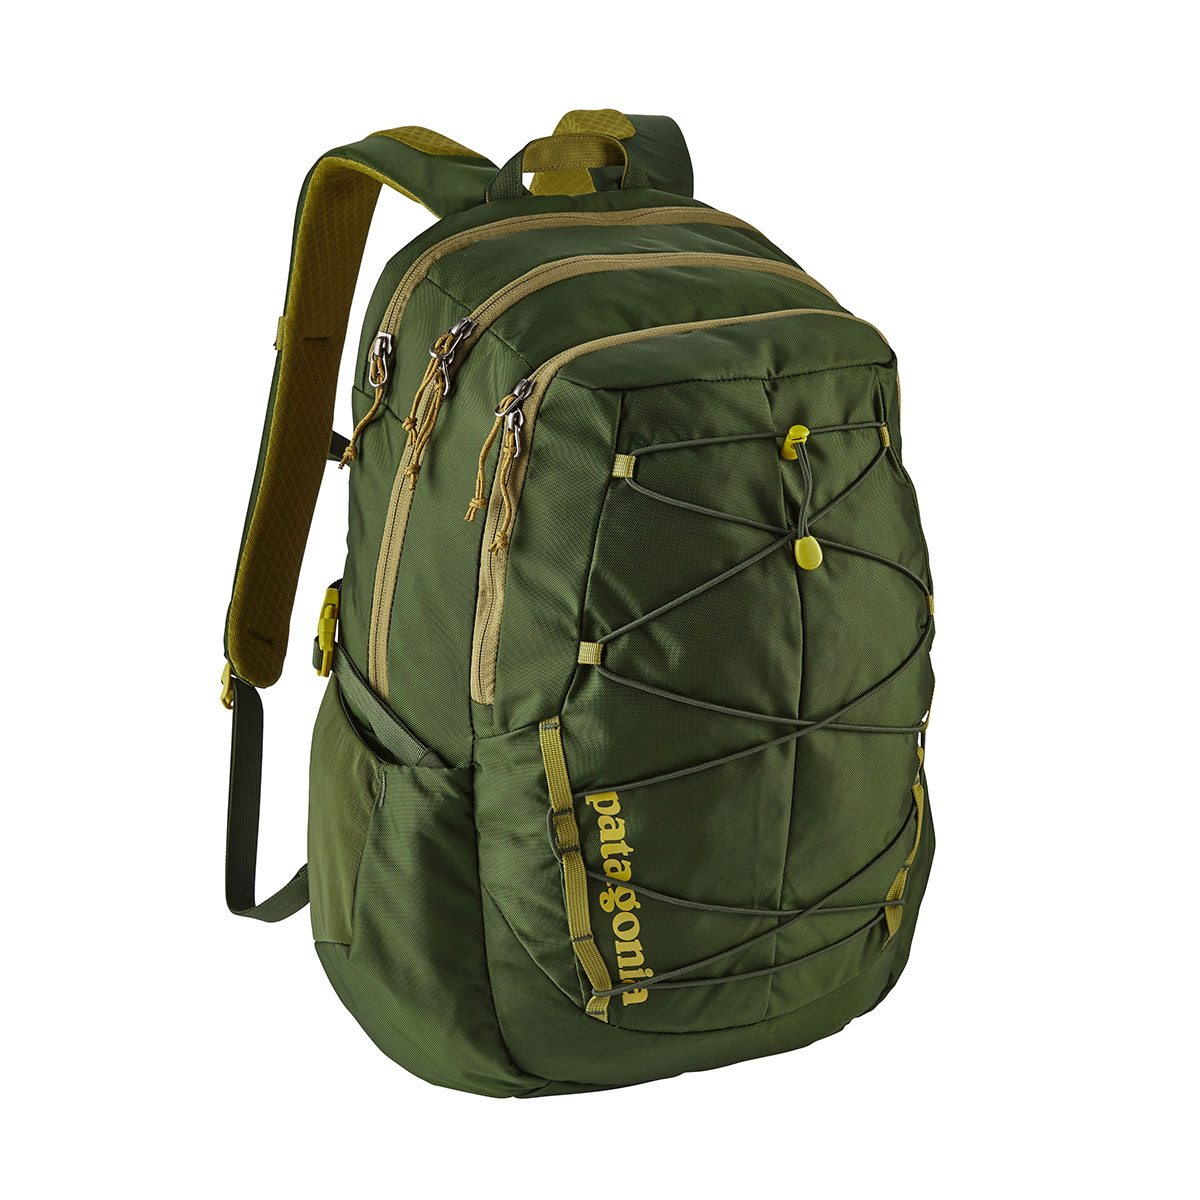 Patagonia Chacabuco Backpack 30L